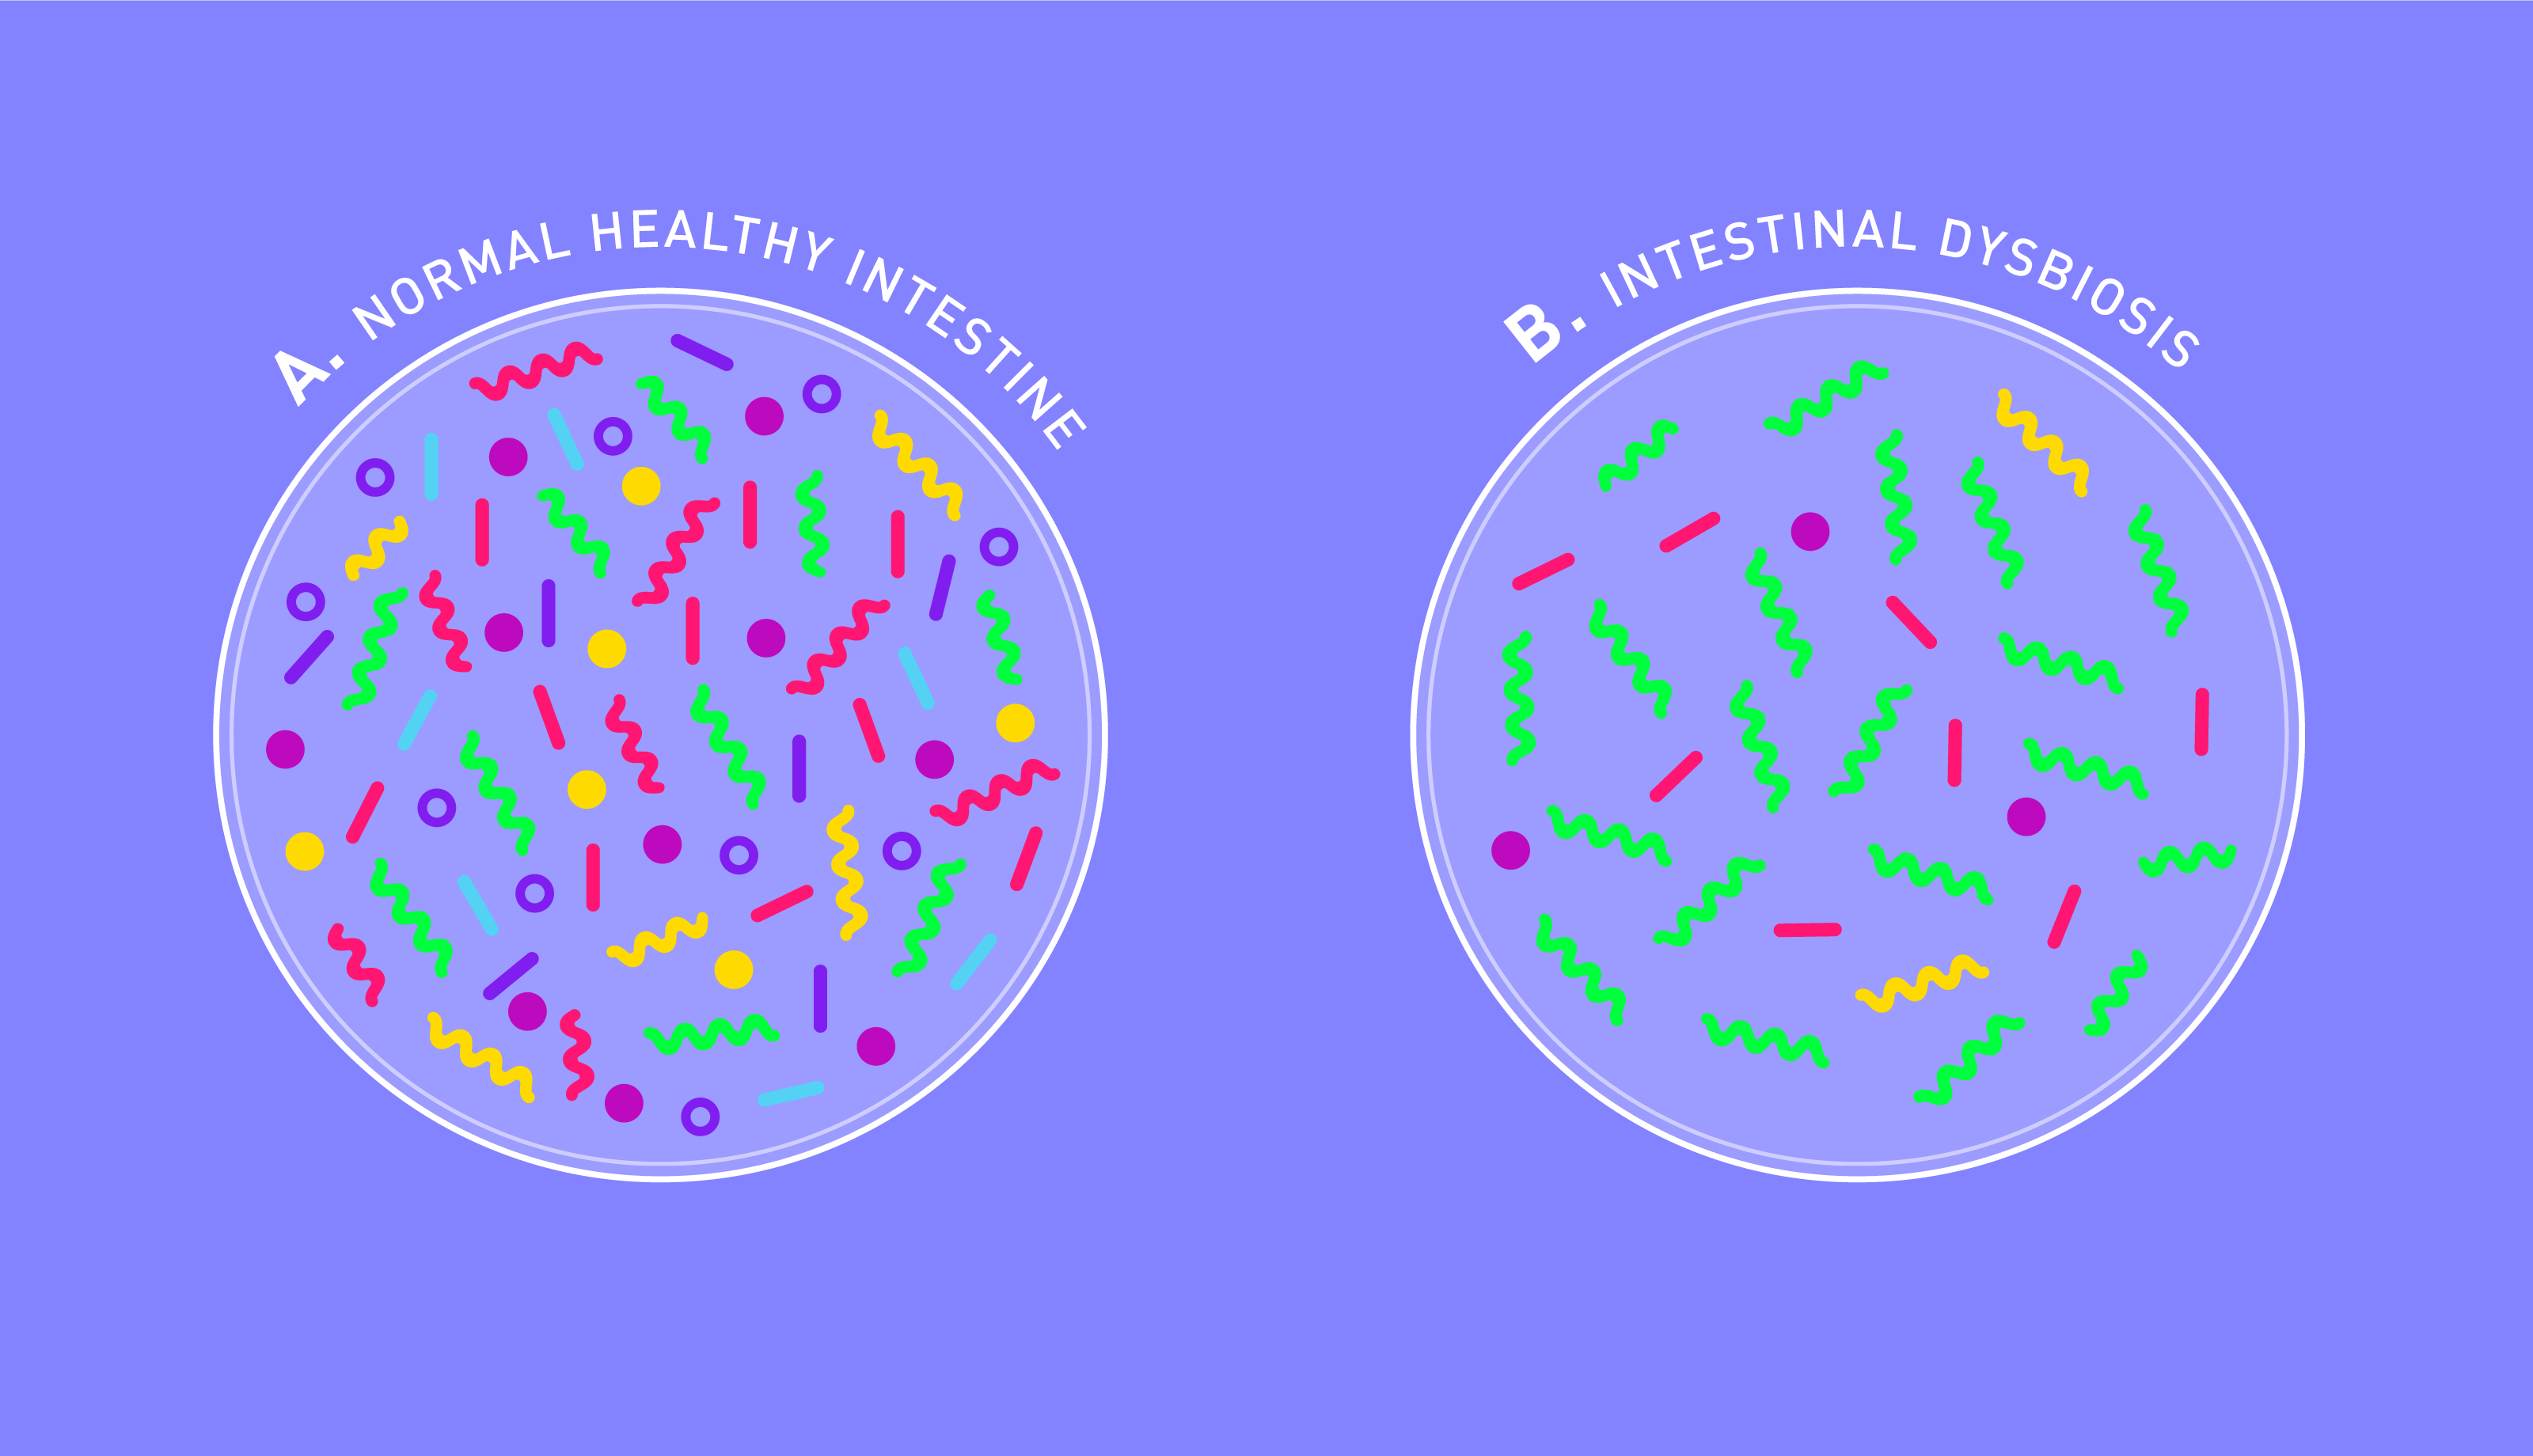 A depleted and unbalanced microbiome plays a role in IBS symptoms